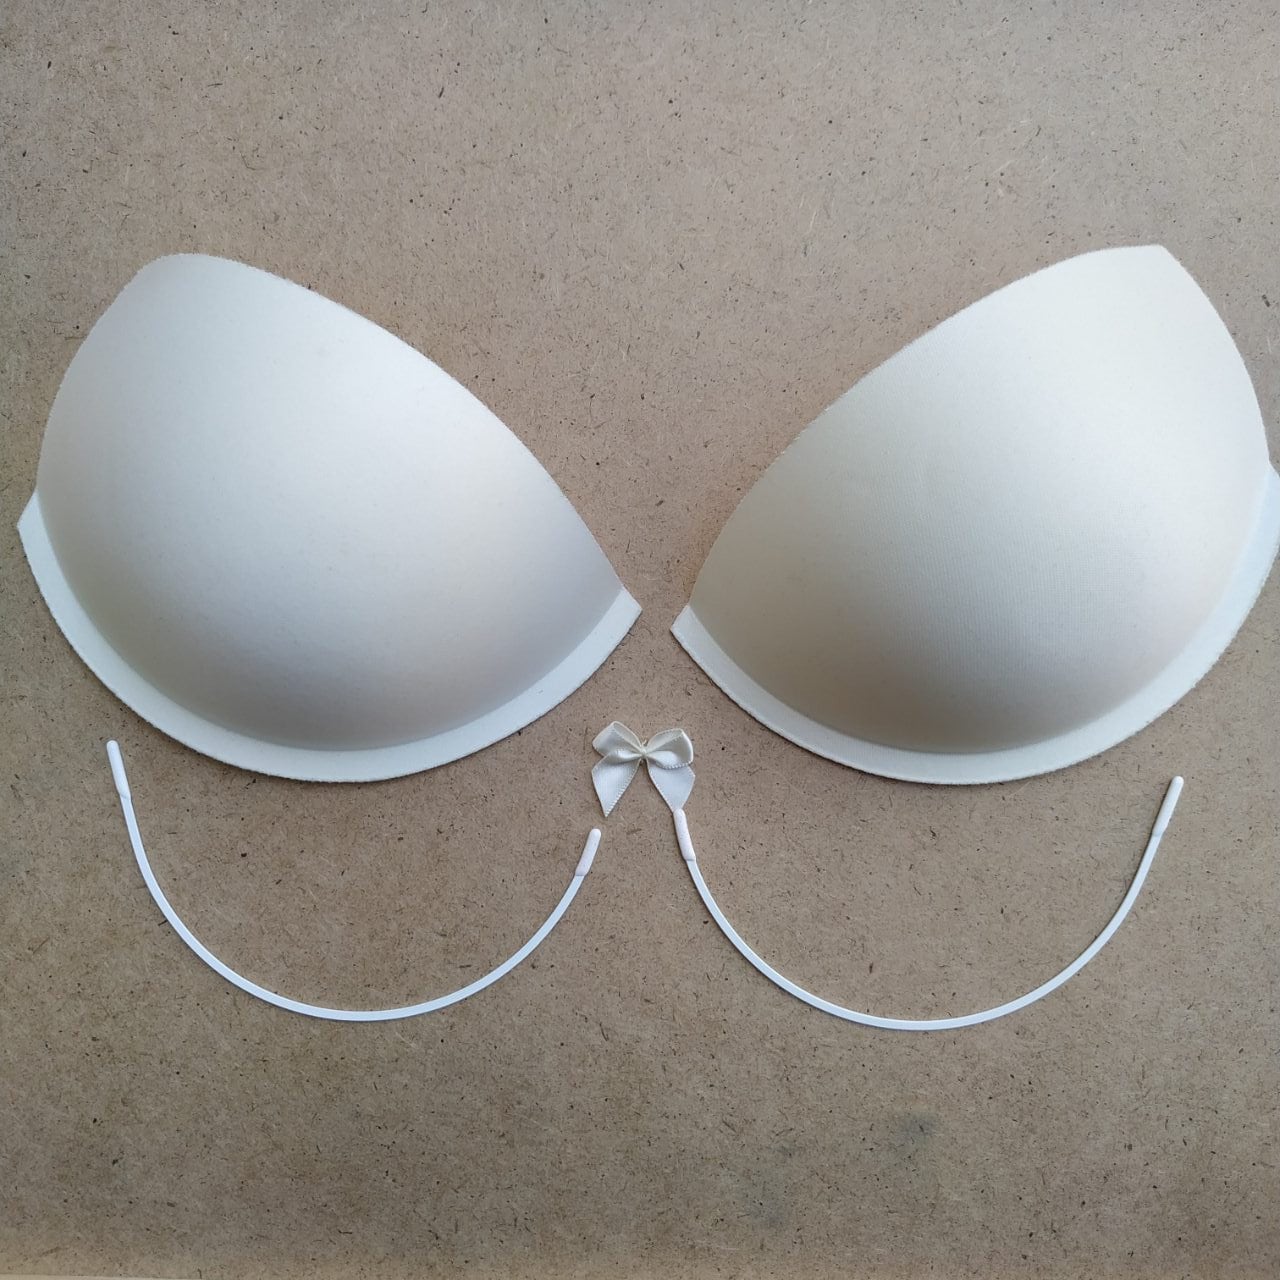 Sew-in Teardrop Bra Cups Pads Inserts - 1 pair Size Small (Cup Size A/B)  M408.05